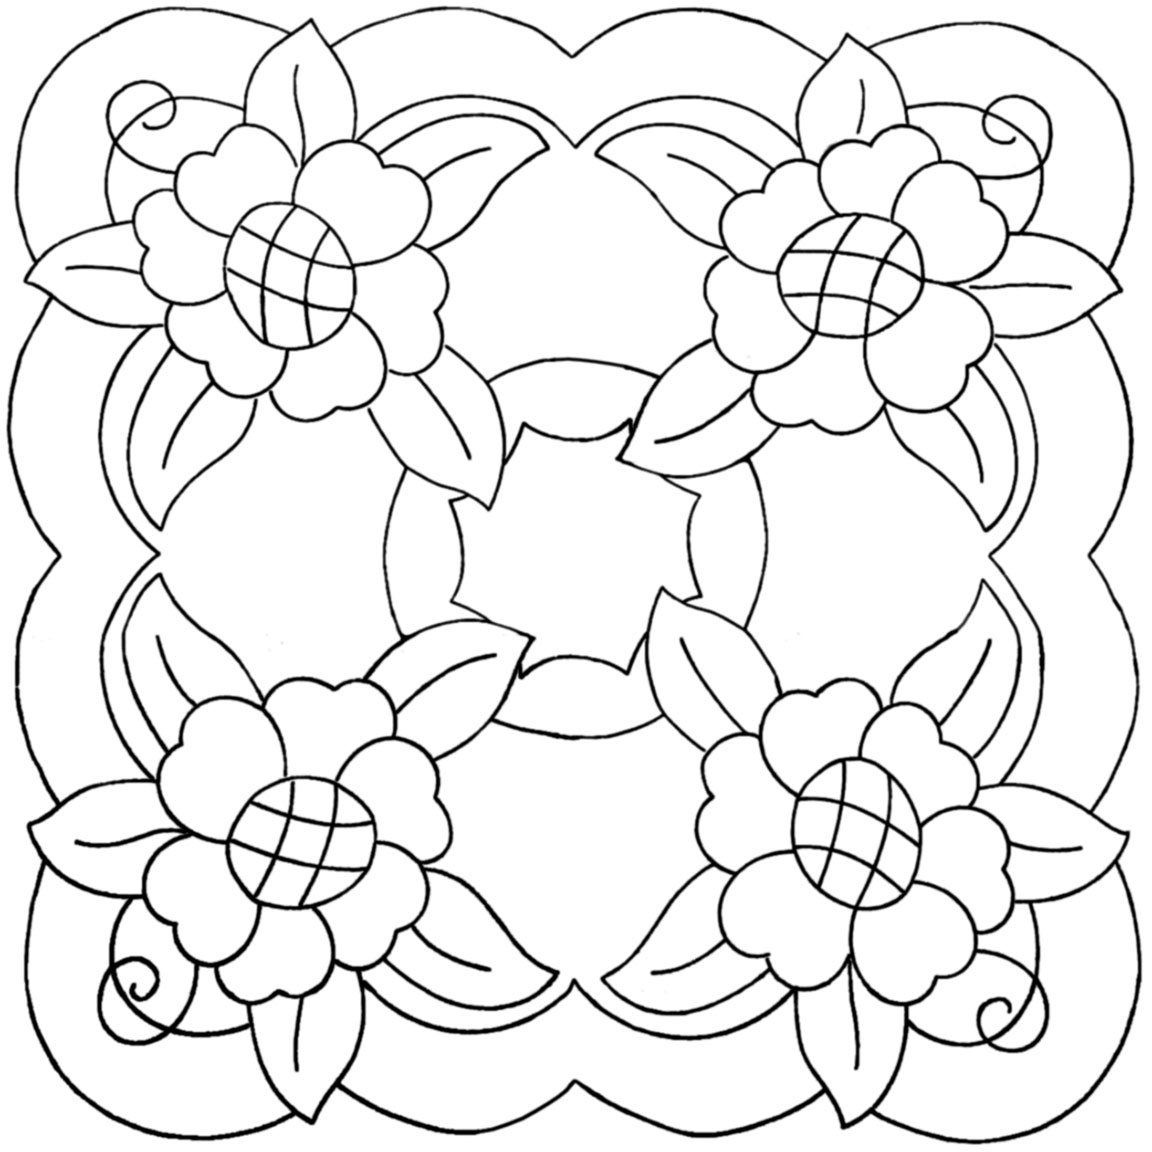 Hand Embroidery Patterns For Quilts Hand Quilting Designs From Vintage Embroidery Transfers Q Is For